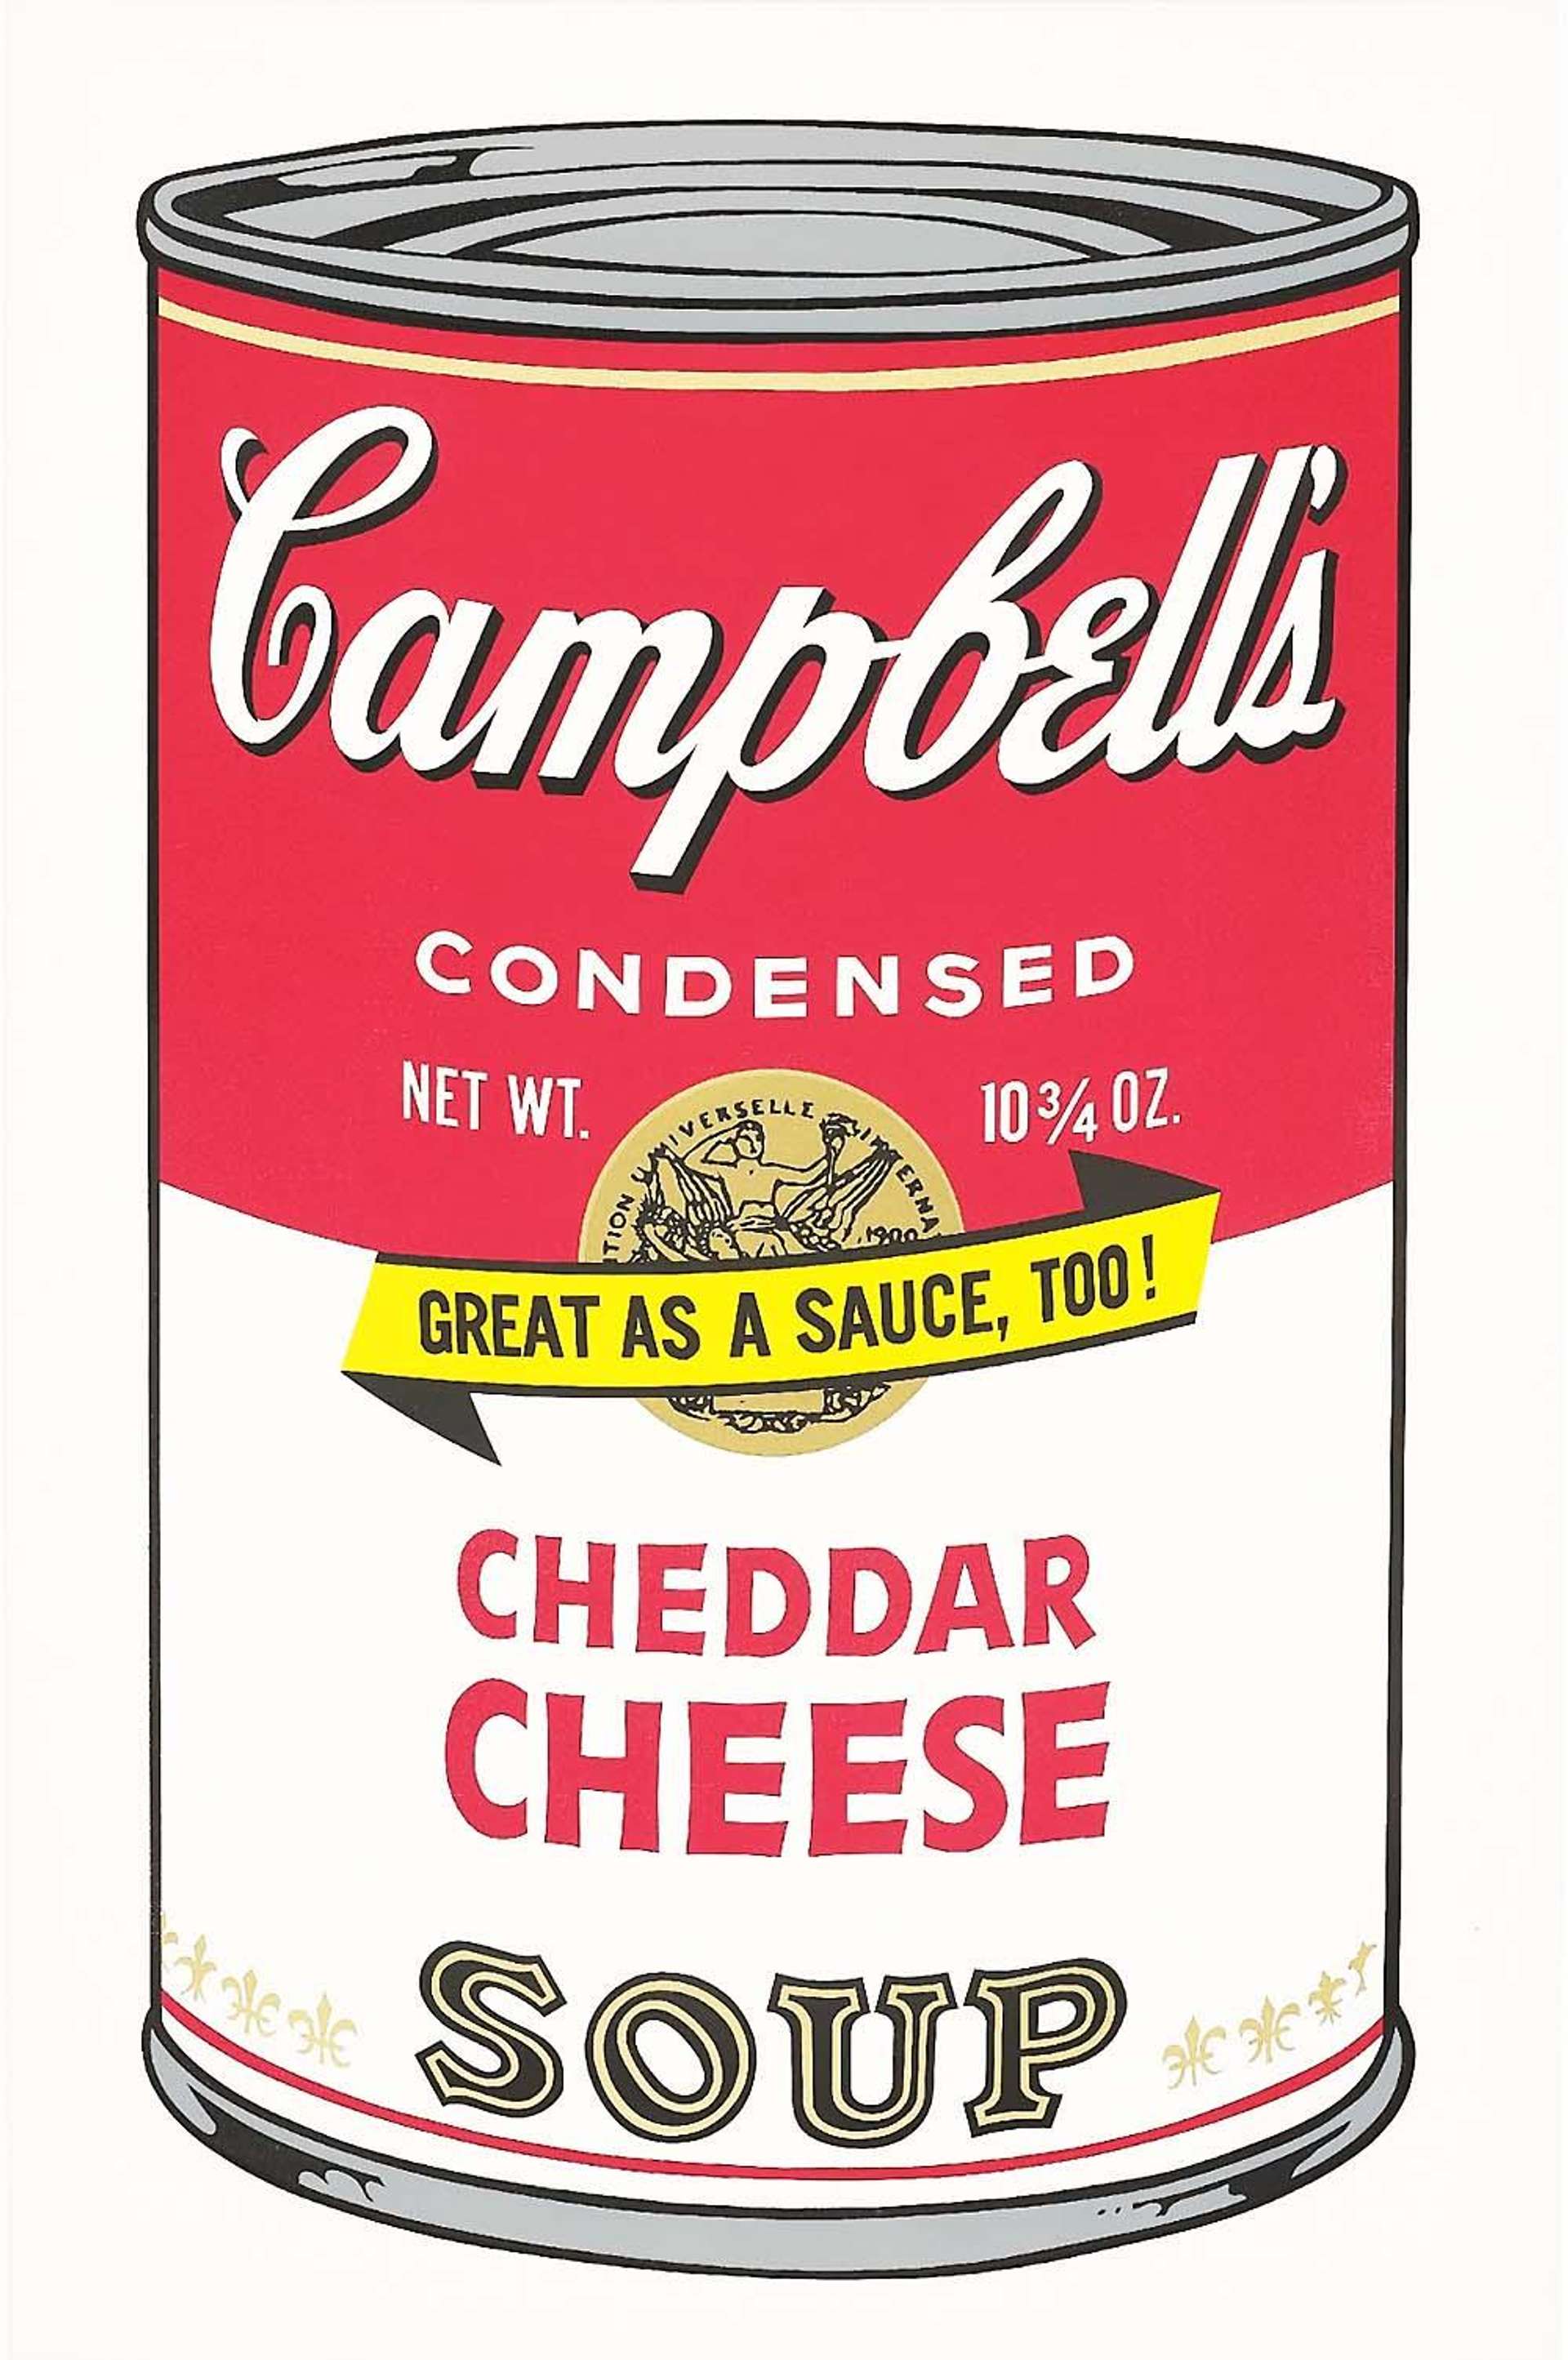 Campbell’s Soup II, Cheddar Cheese (F. & S. II.63) - Signed Print by Andy Warhol 1969 - MyArtBroker